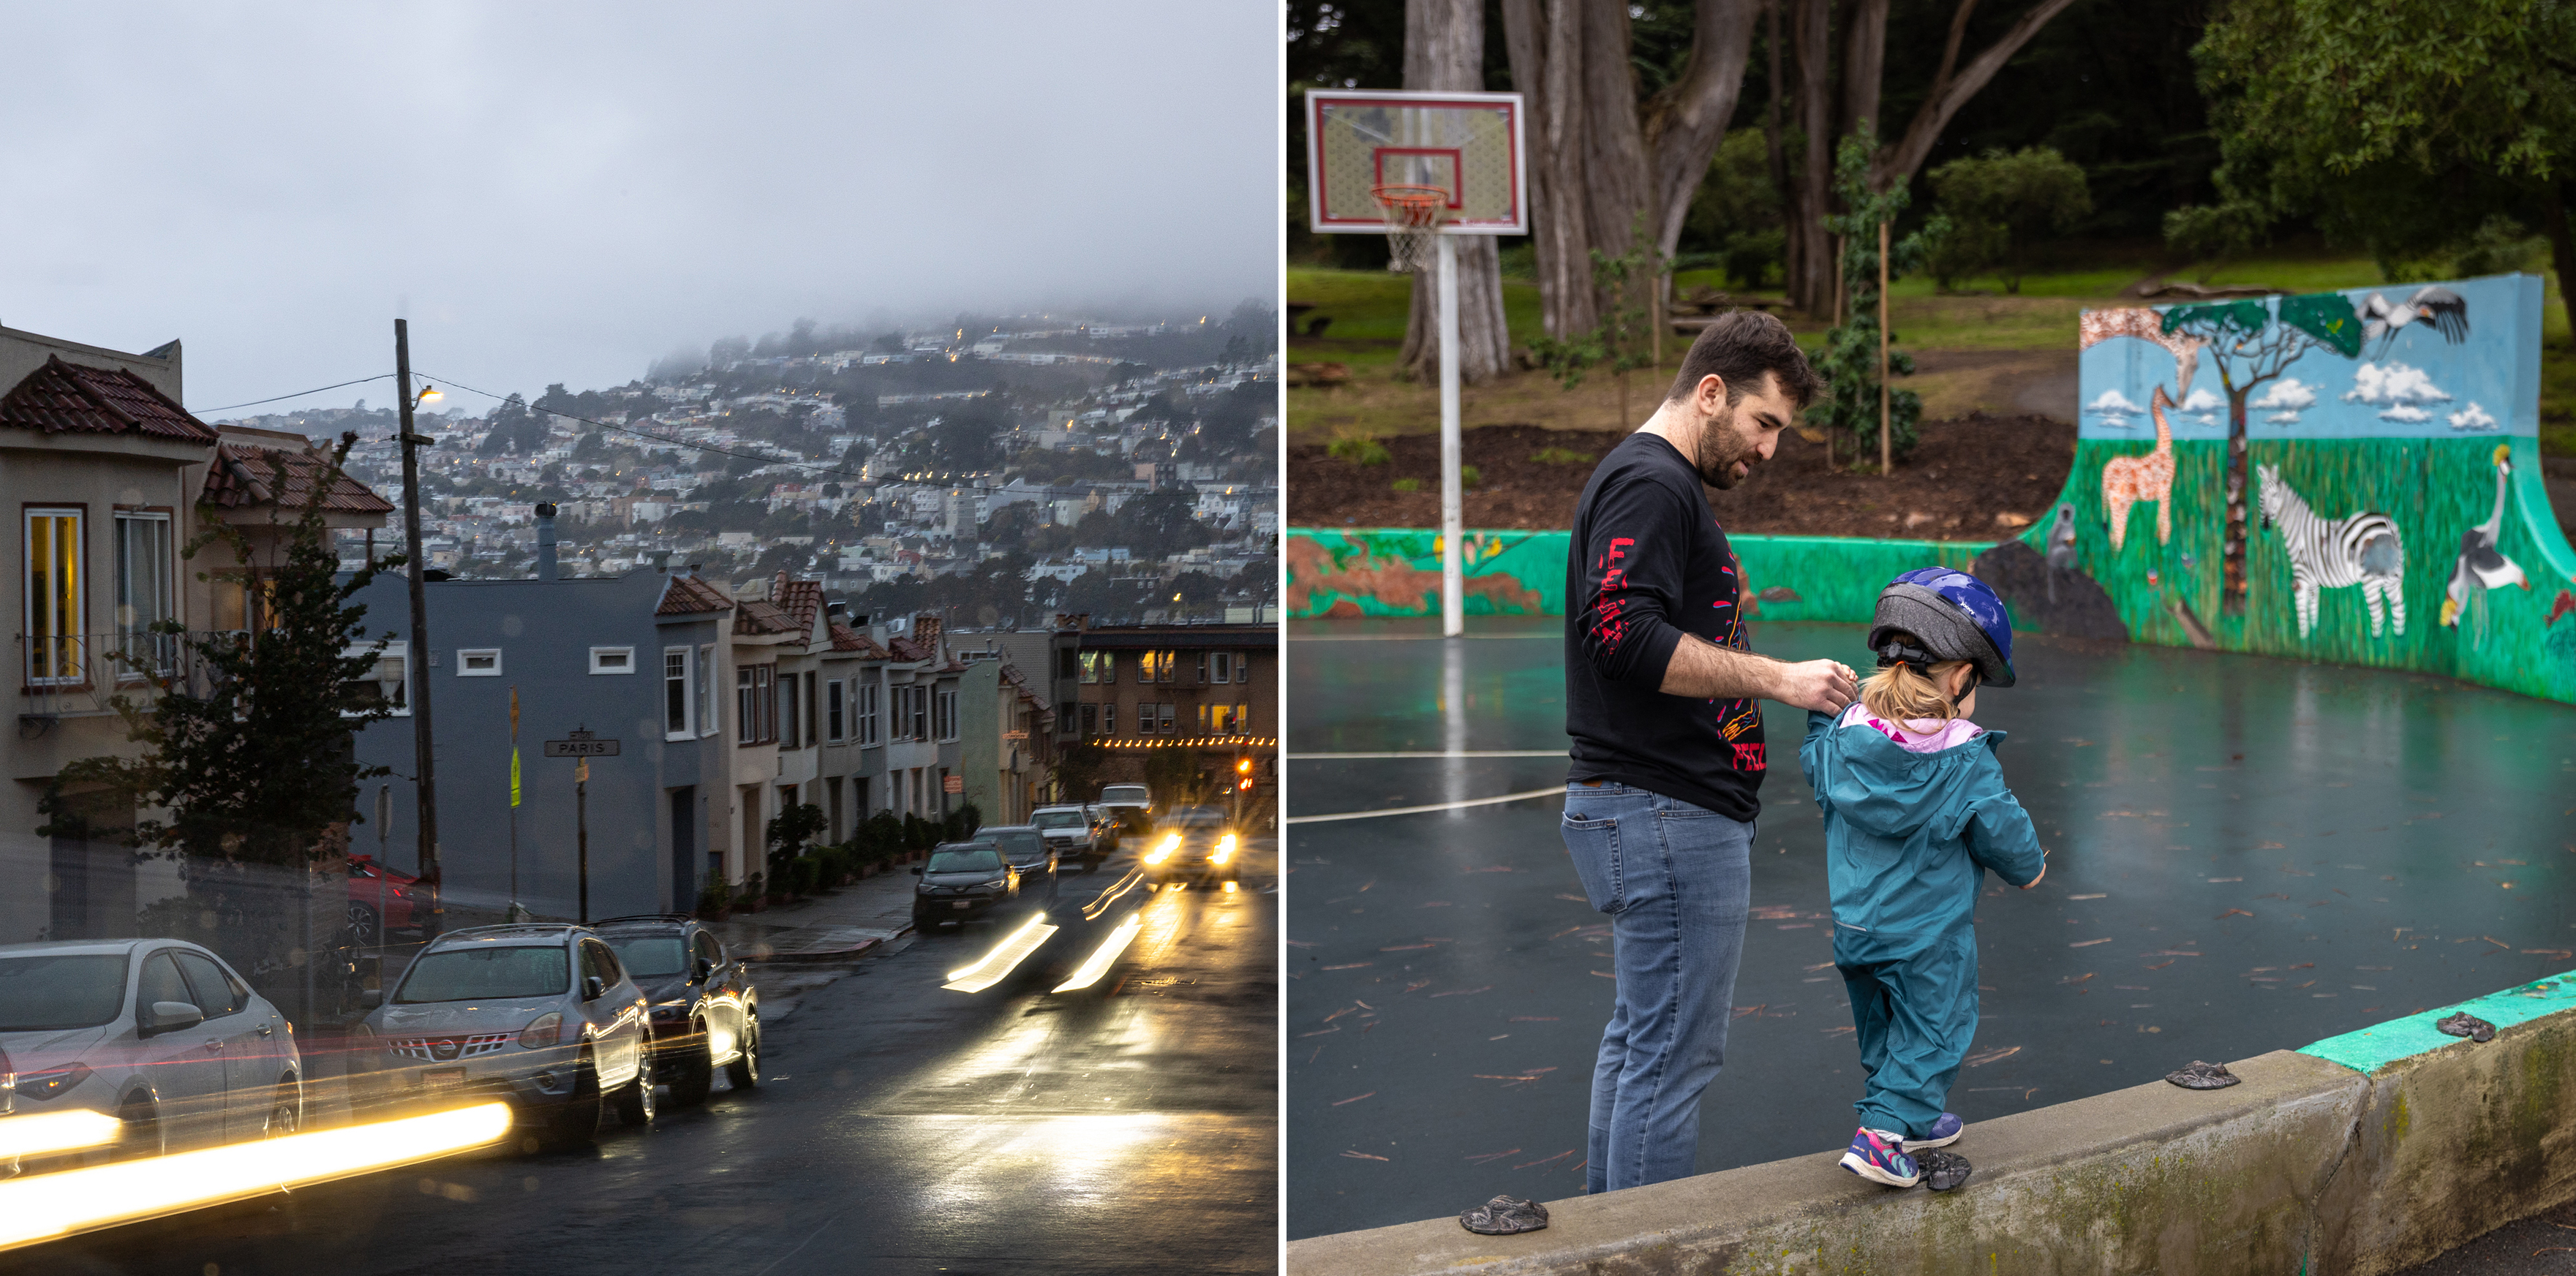 Two photos side by side - one of cars driving down a city street at twilight and another photo of a man helping a child walk along an elevated curb at a park